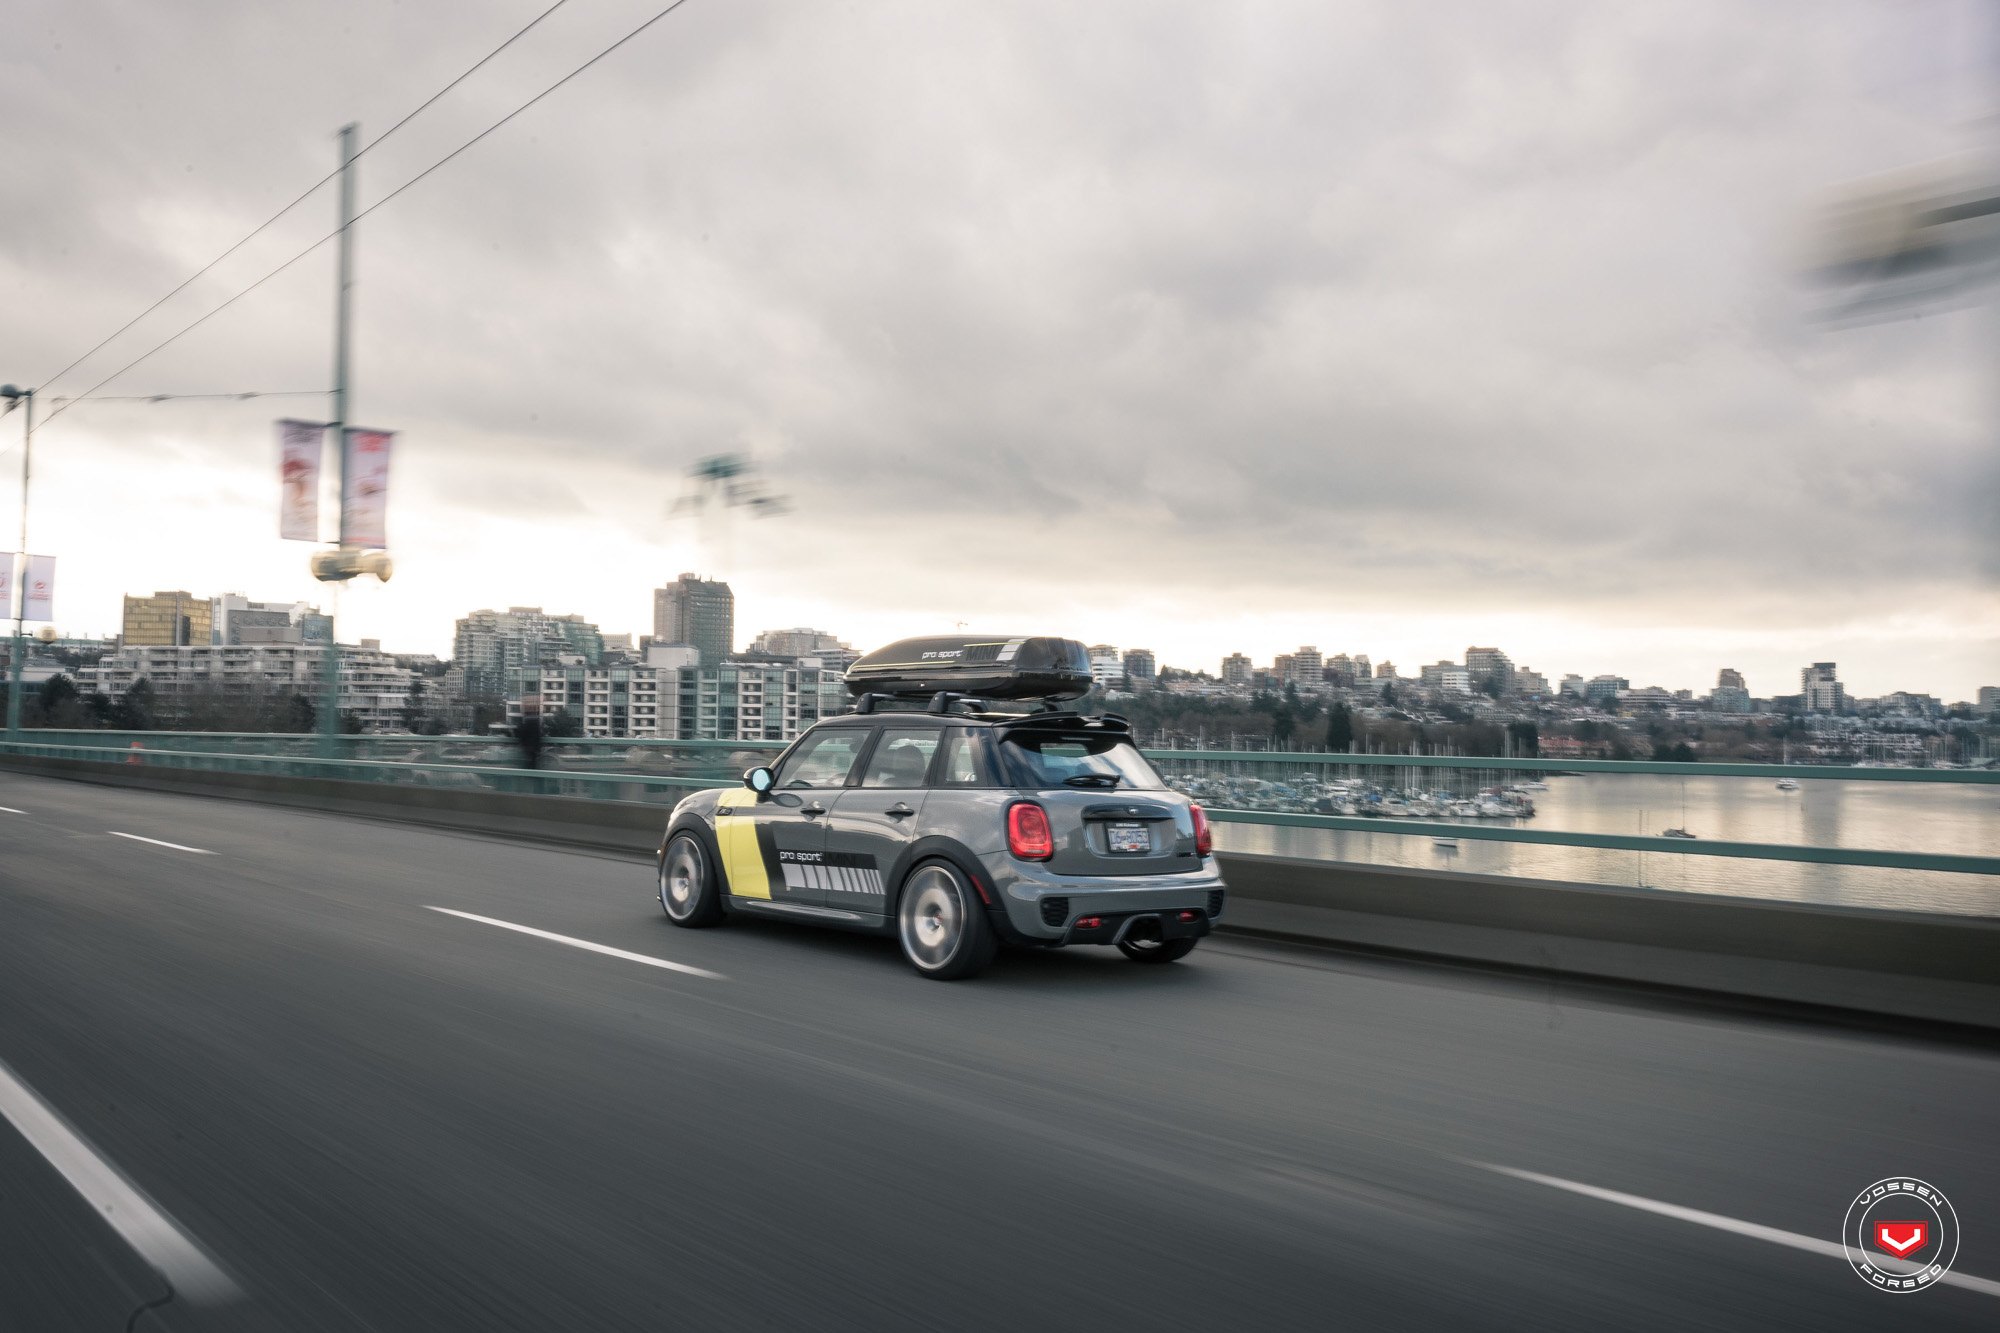 Gray Mini Cooper with Pro Sport Roof Rack - Photo by Vossen